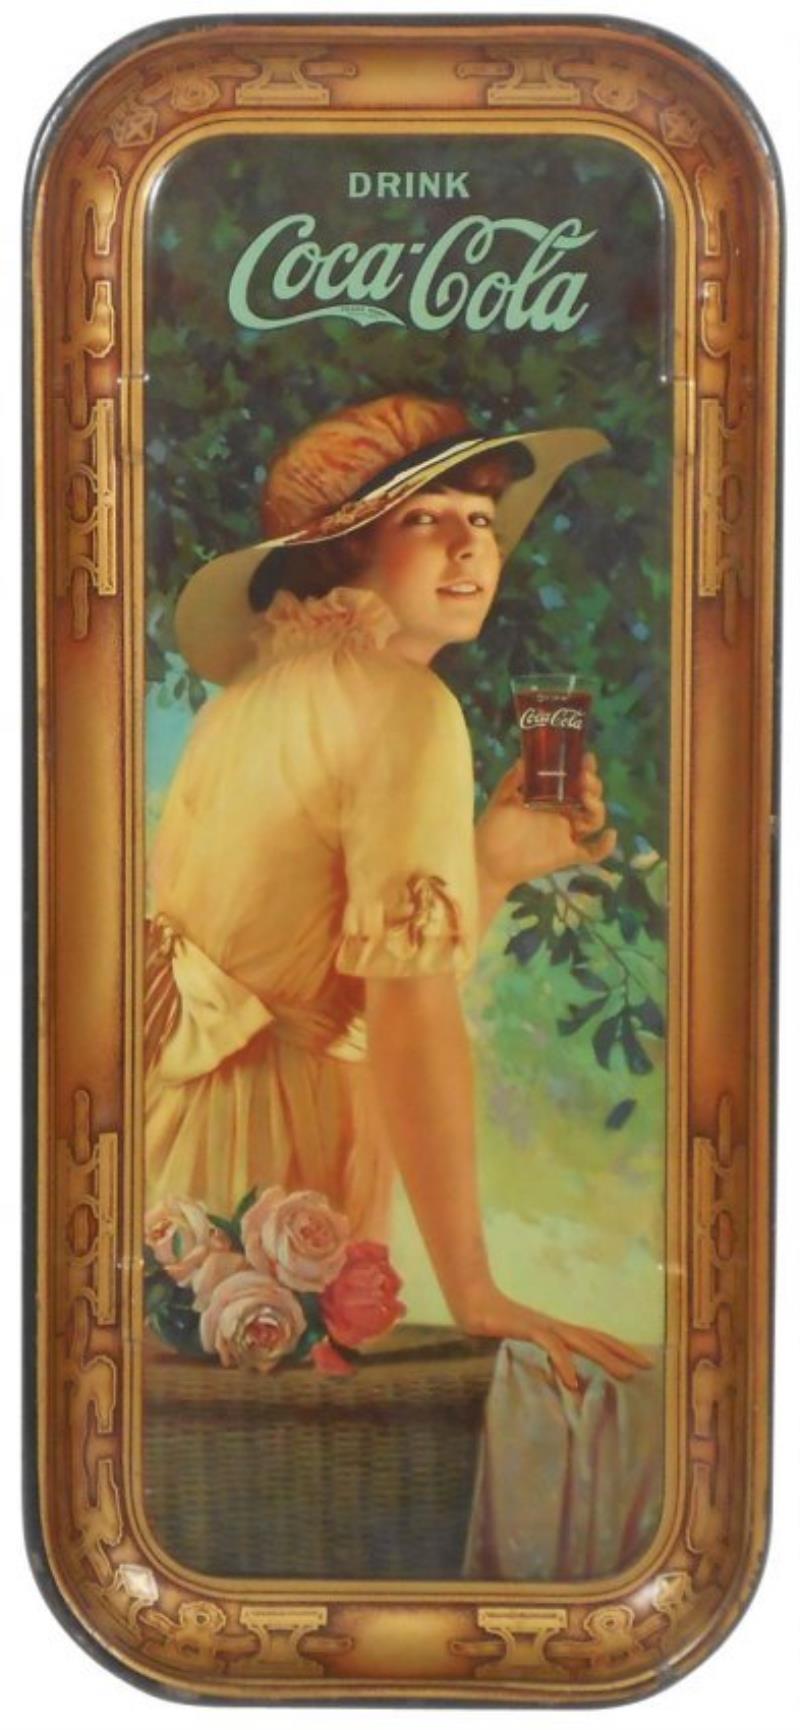 Coca-Cola serving tray, 1916, Elaine, litho on metal by